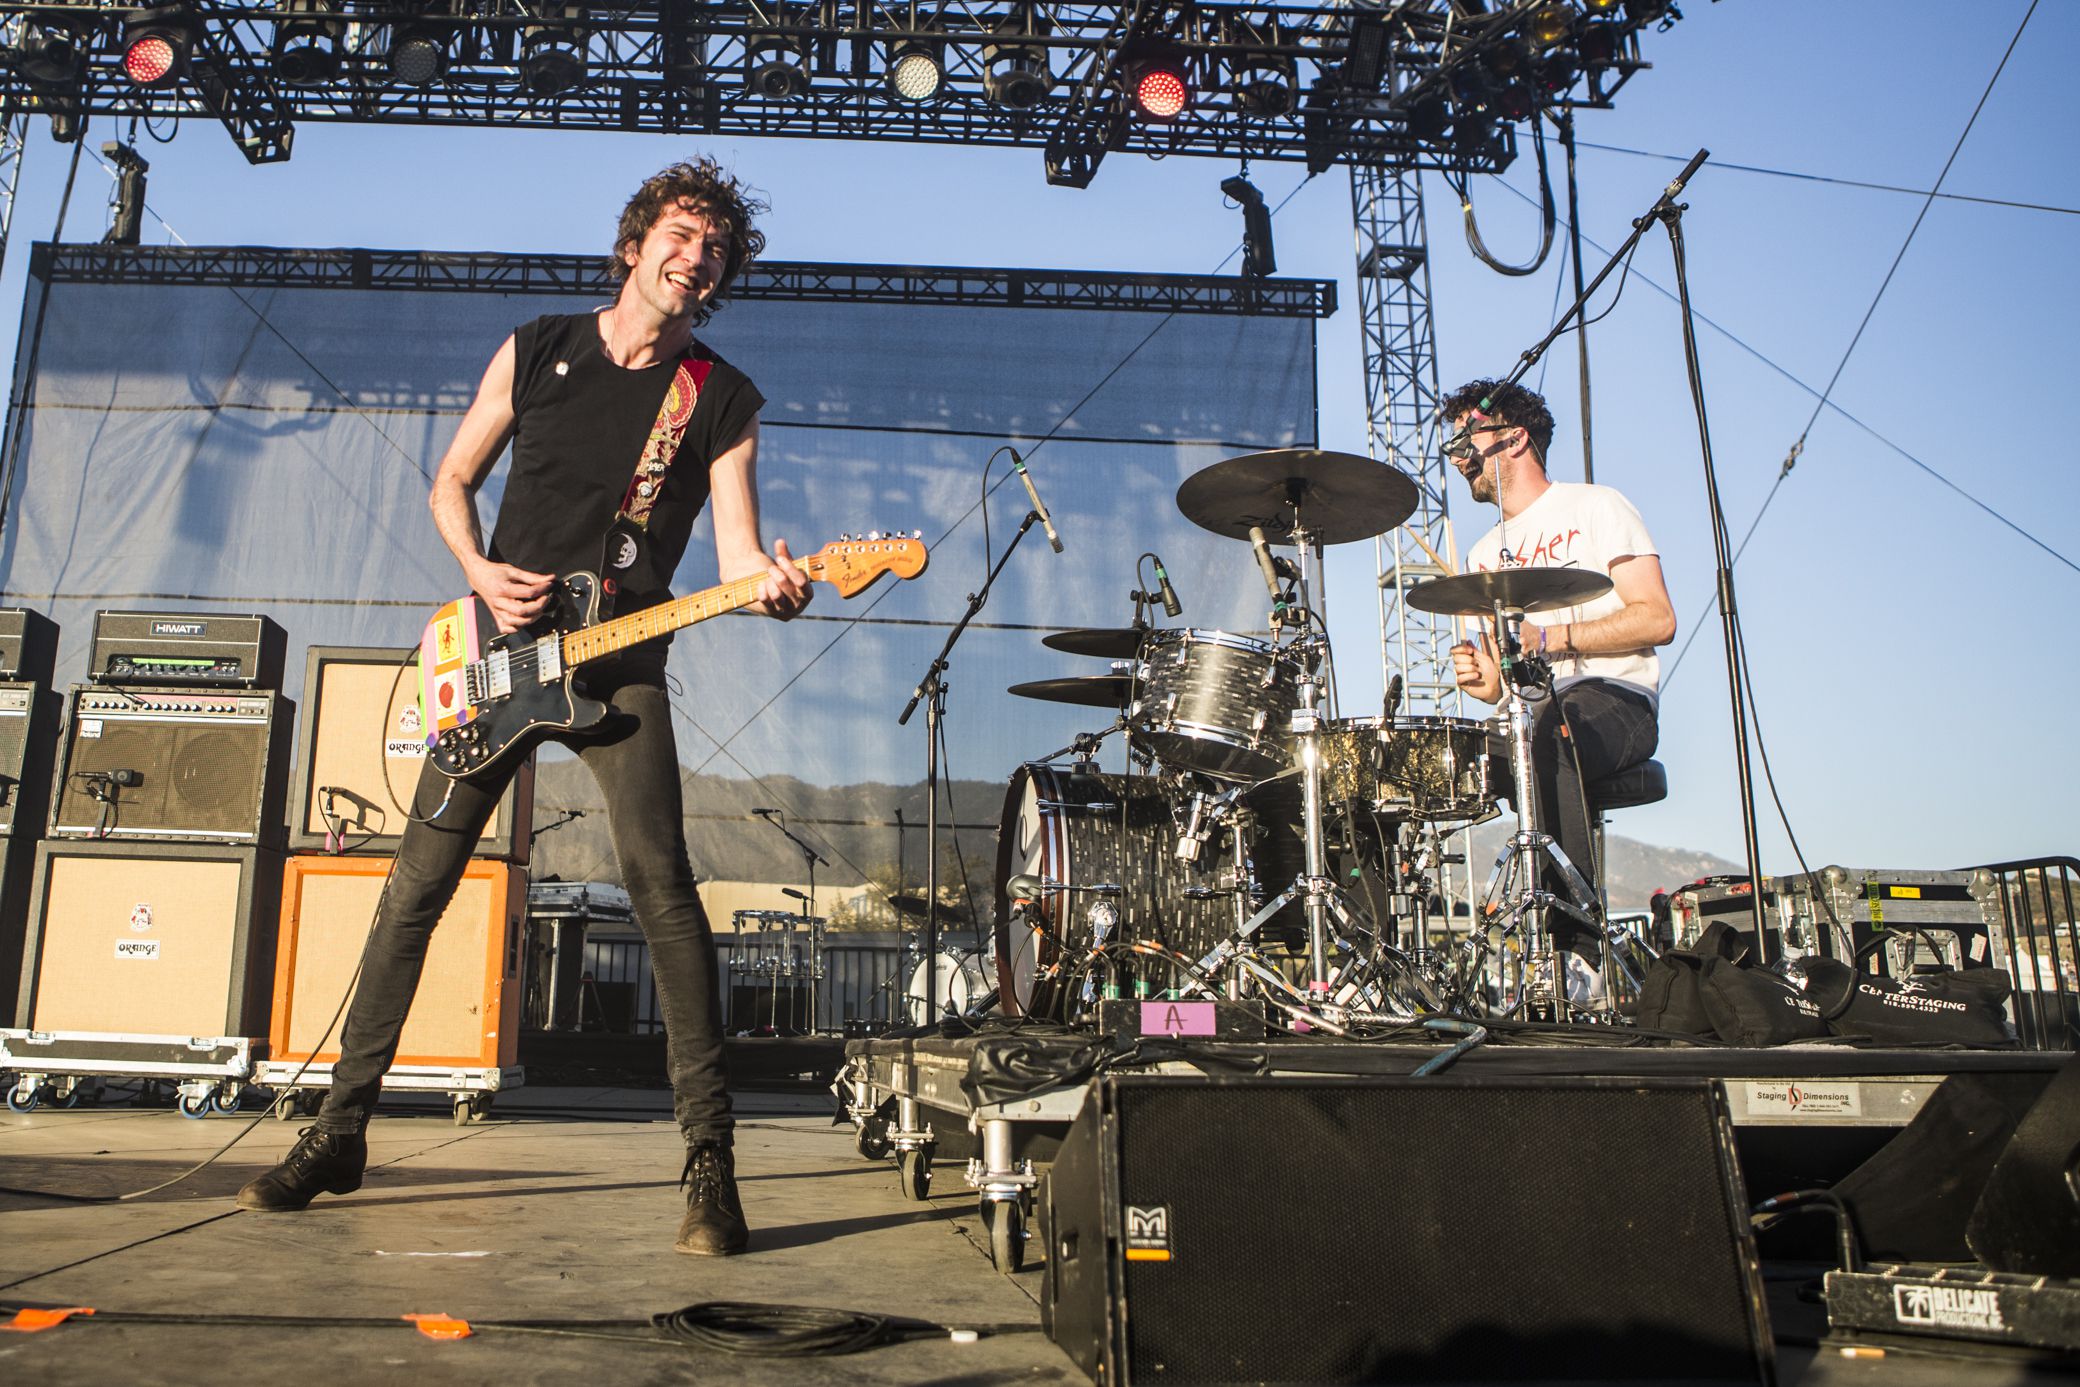 japandroids 2 Cal Jam Offered Everything Youd Want From Dave Grohl